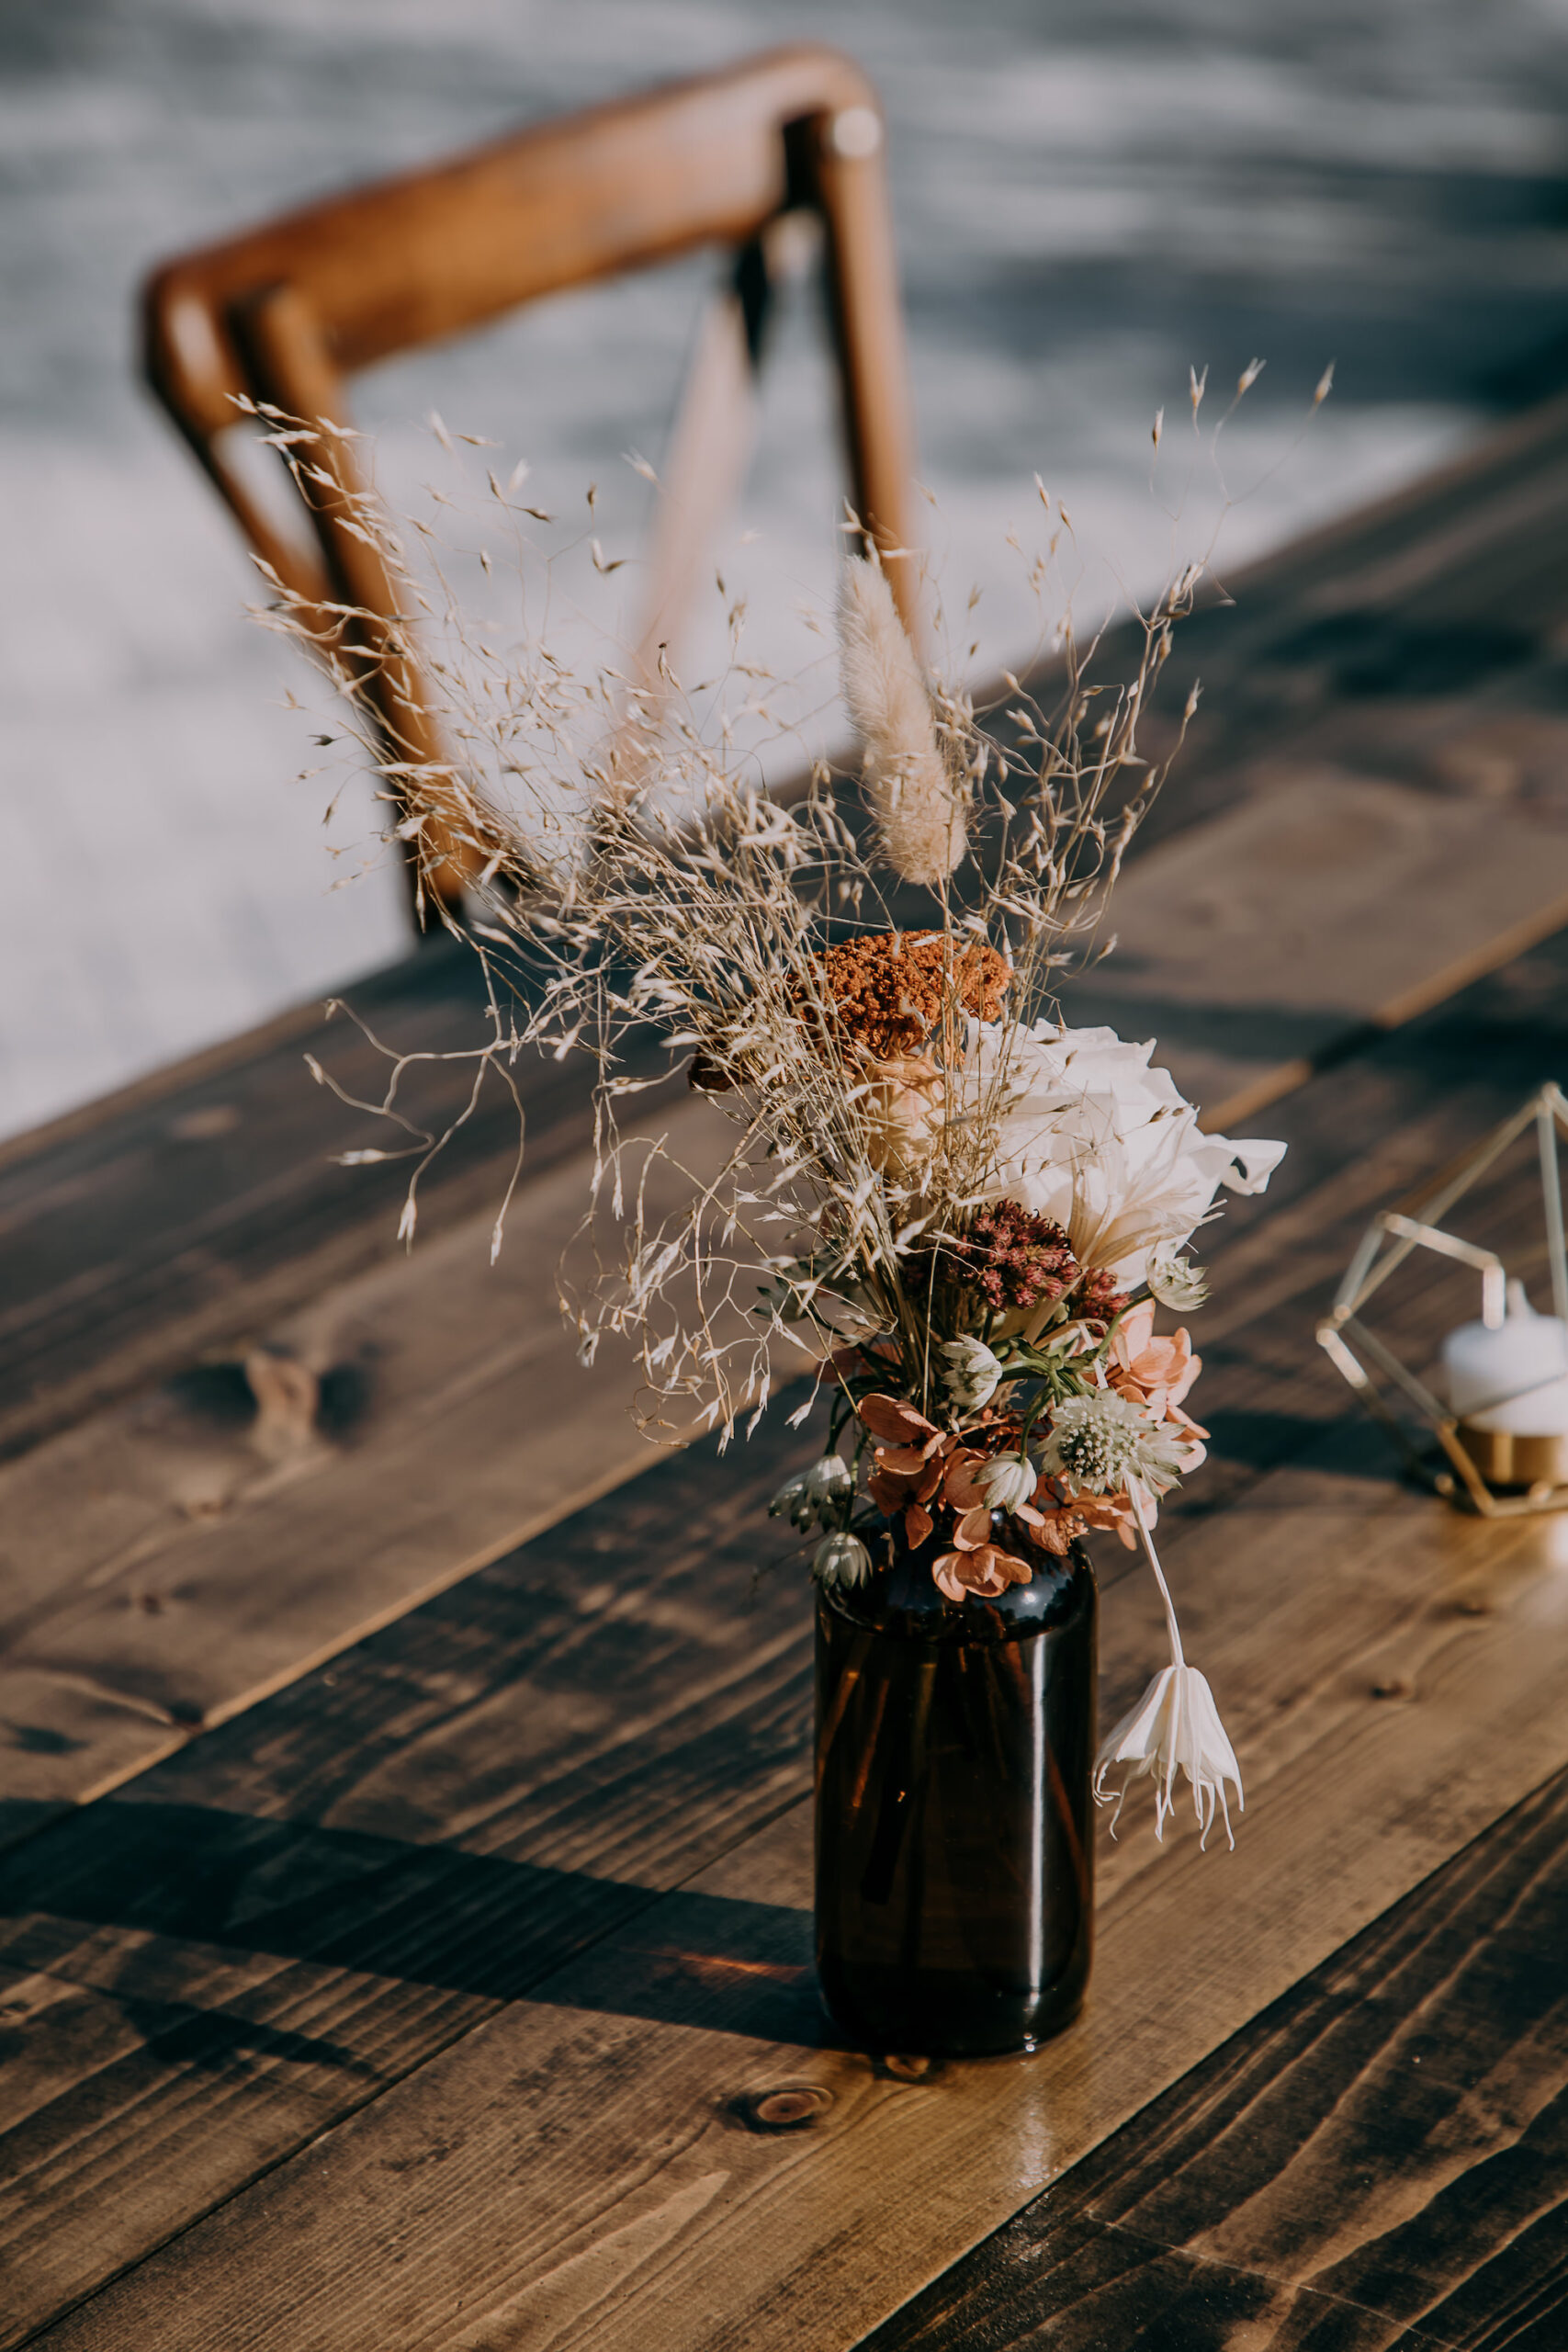 Boho Vintage Wedding Reception Decor, Wooden Table with Dried Flowers Floral Centerpiece | Tampa Bay Wedding Planner Stephany Perry Events